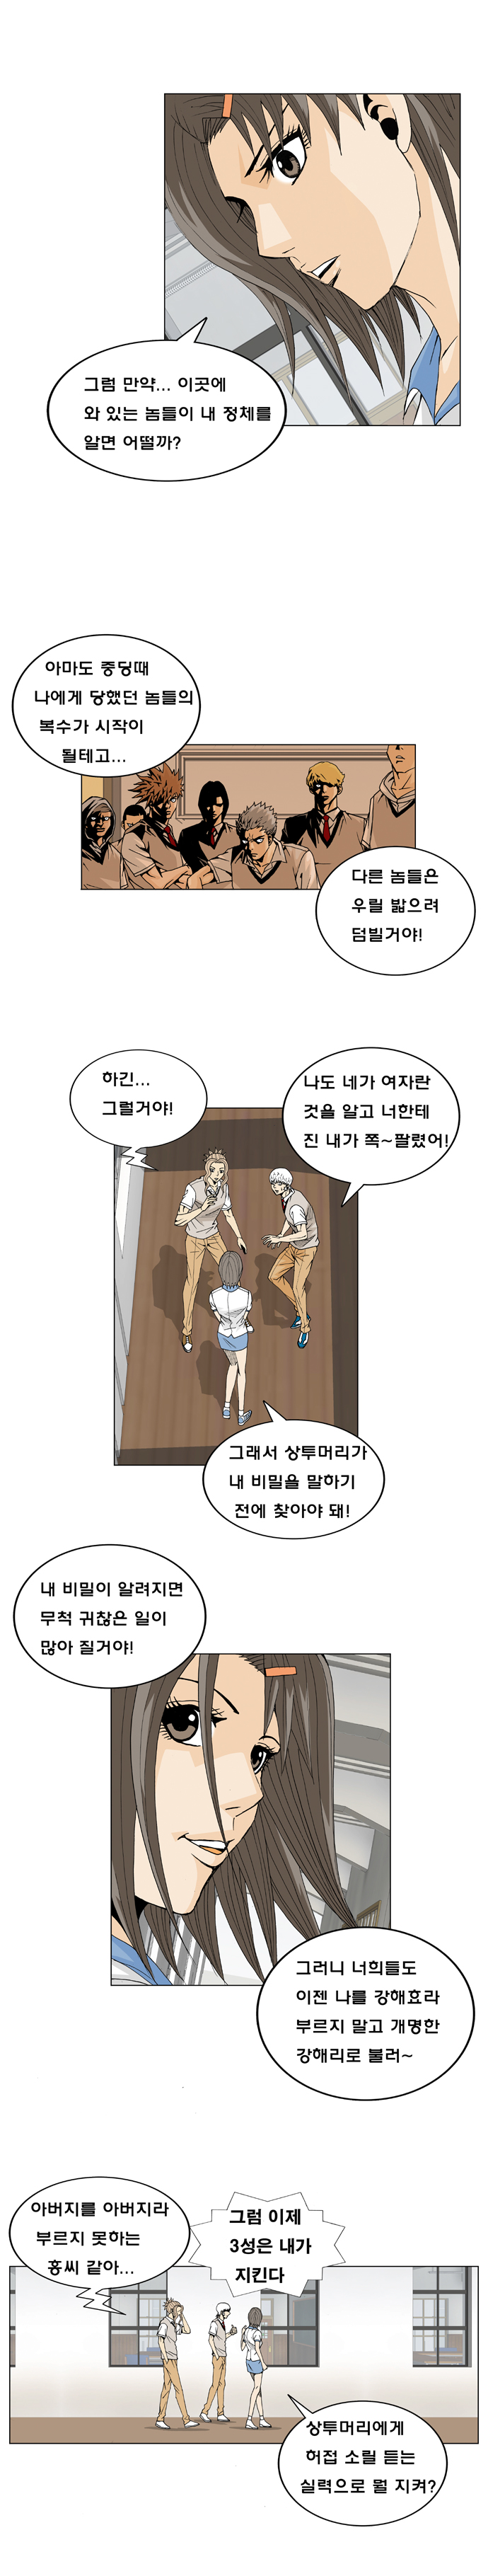 Ultimate Legend - Kang Hae Hyo - Chapter 15 - Page 3